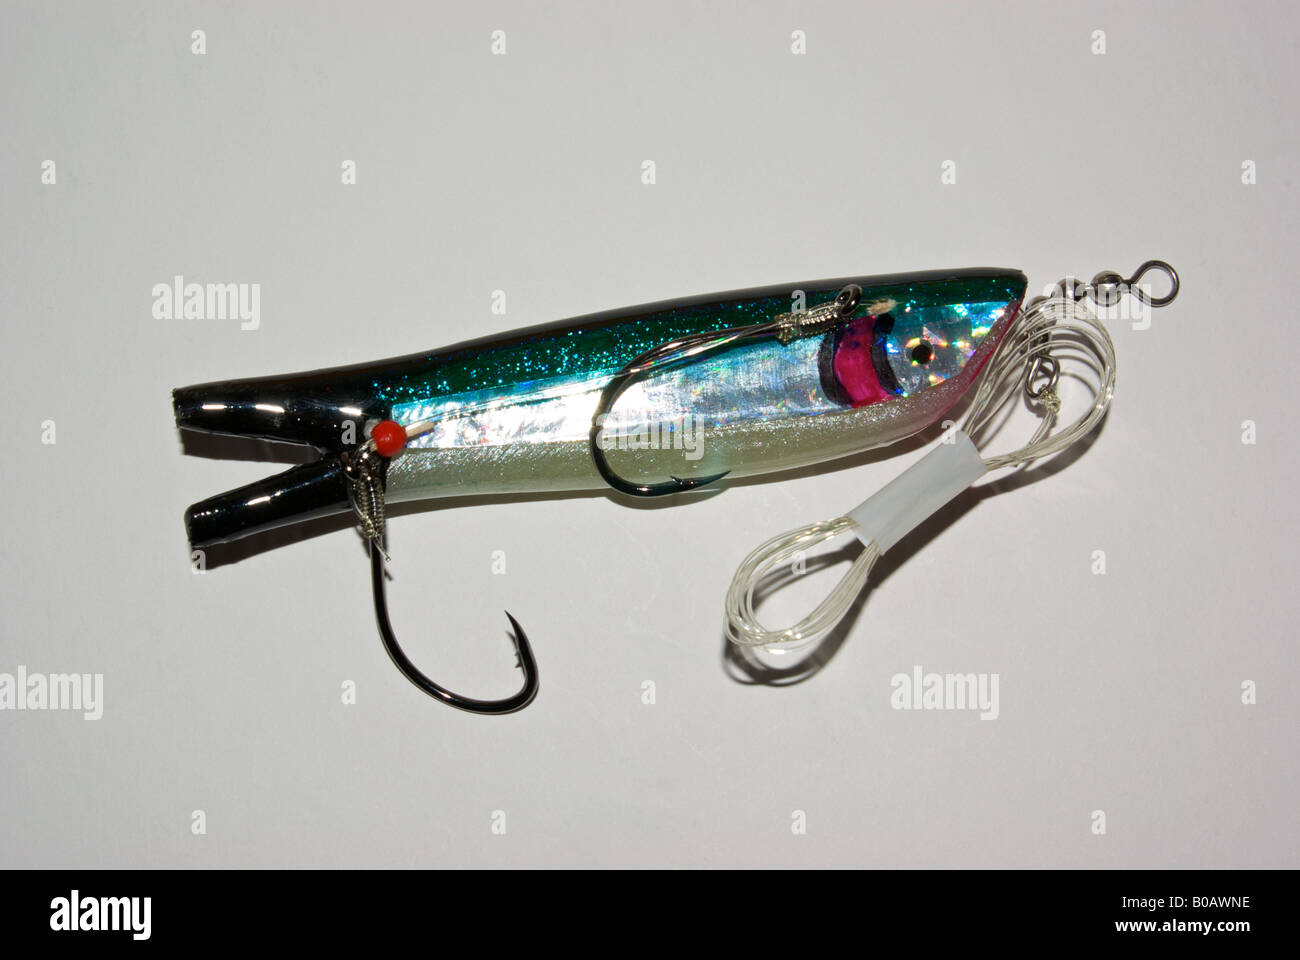 True Roll trolling fishing lure attracts salmon bottom fish and